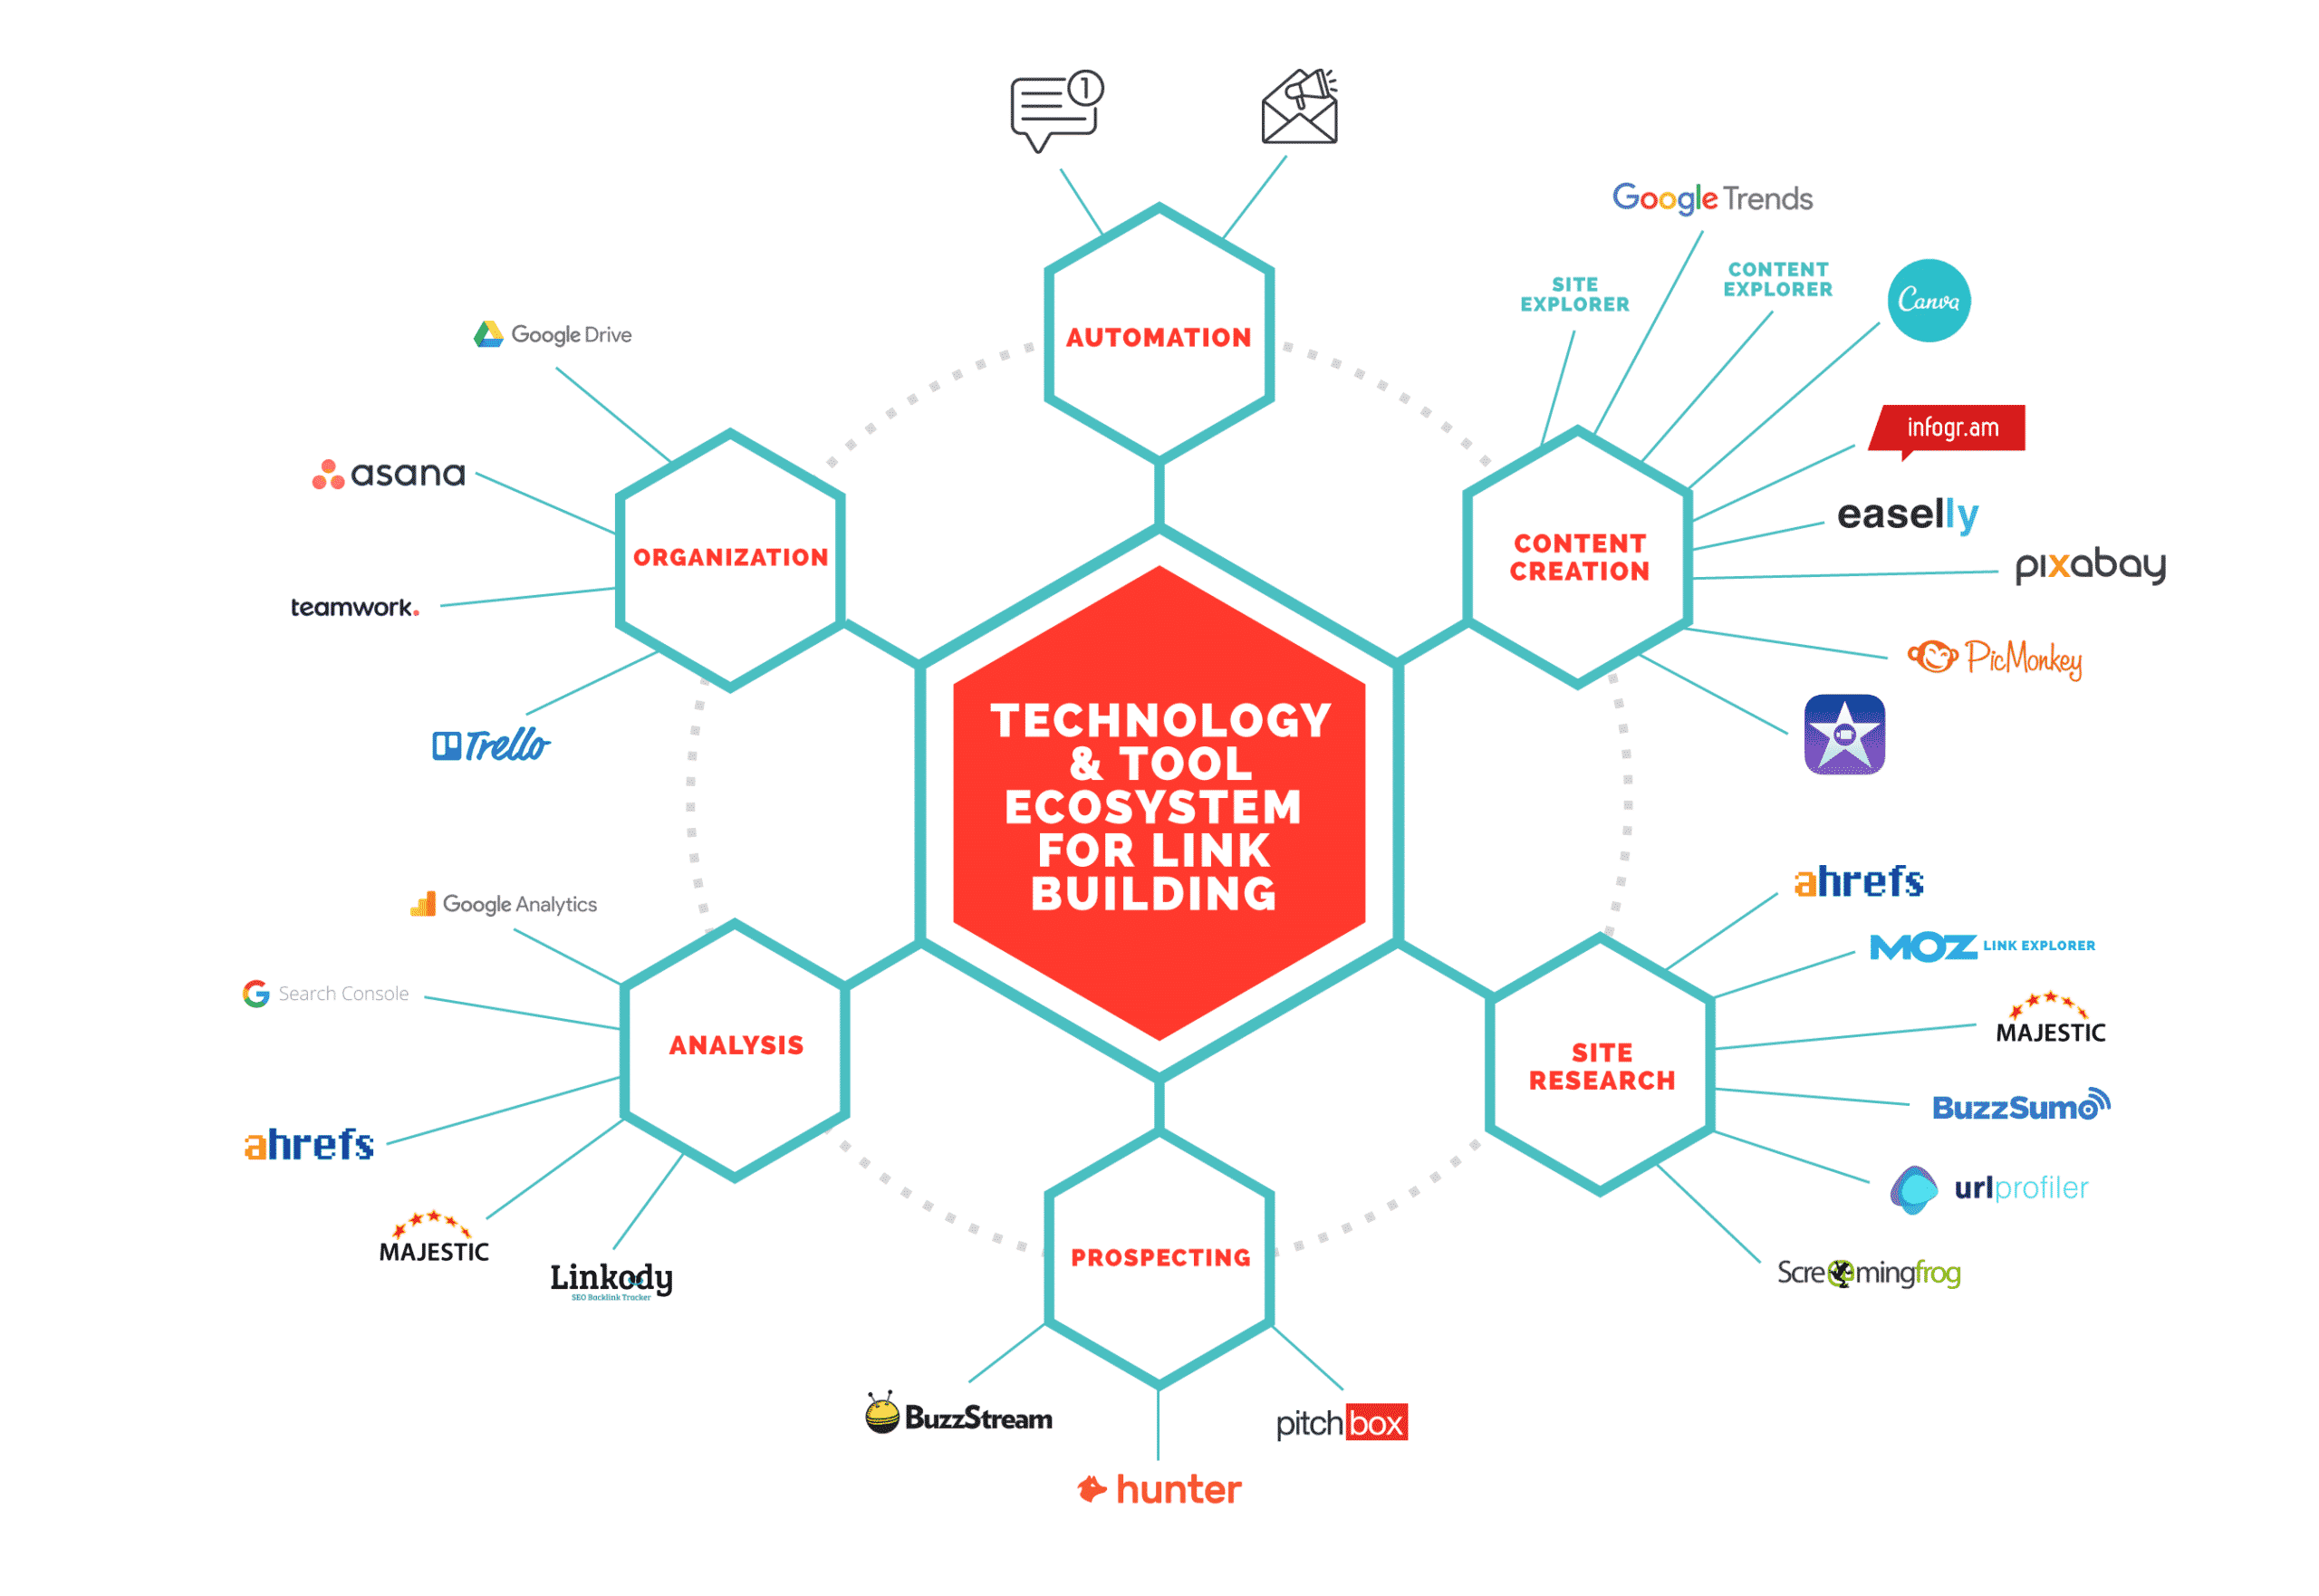 https://purelinq.com/wp-content/uploads/2020/07/Tech-and-Tool-Ecosystem-Infographic-v2.png